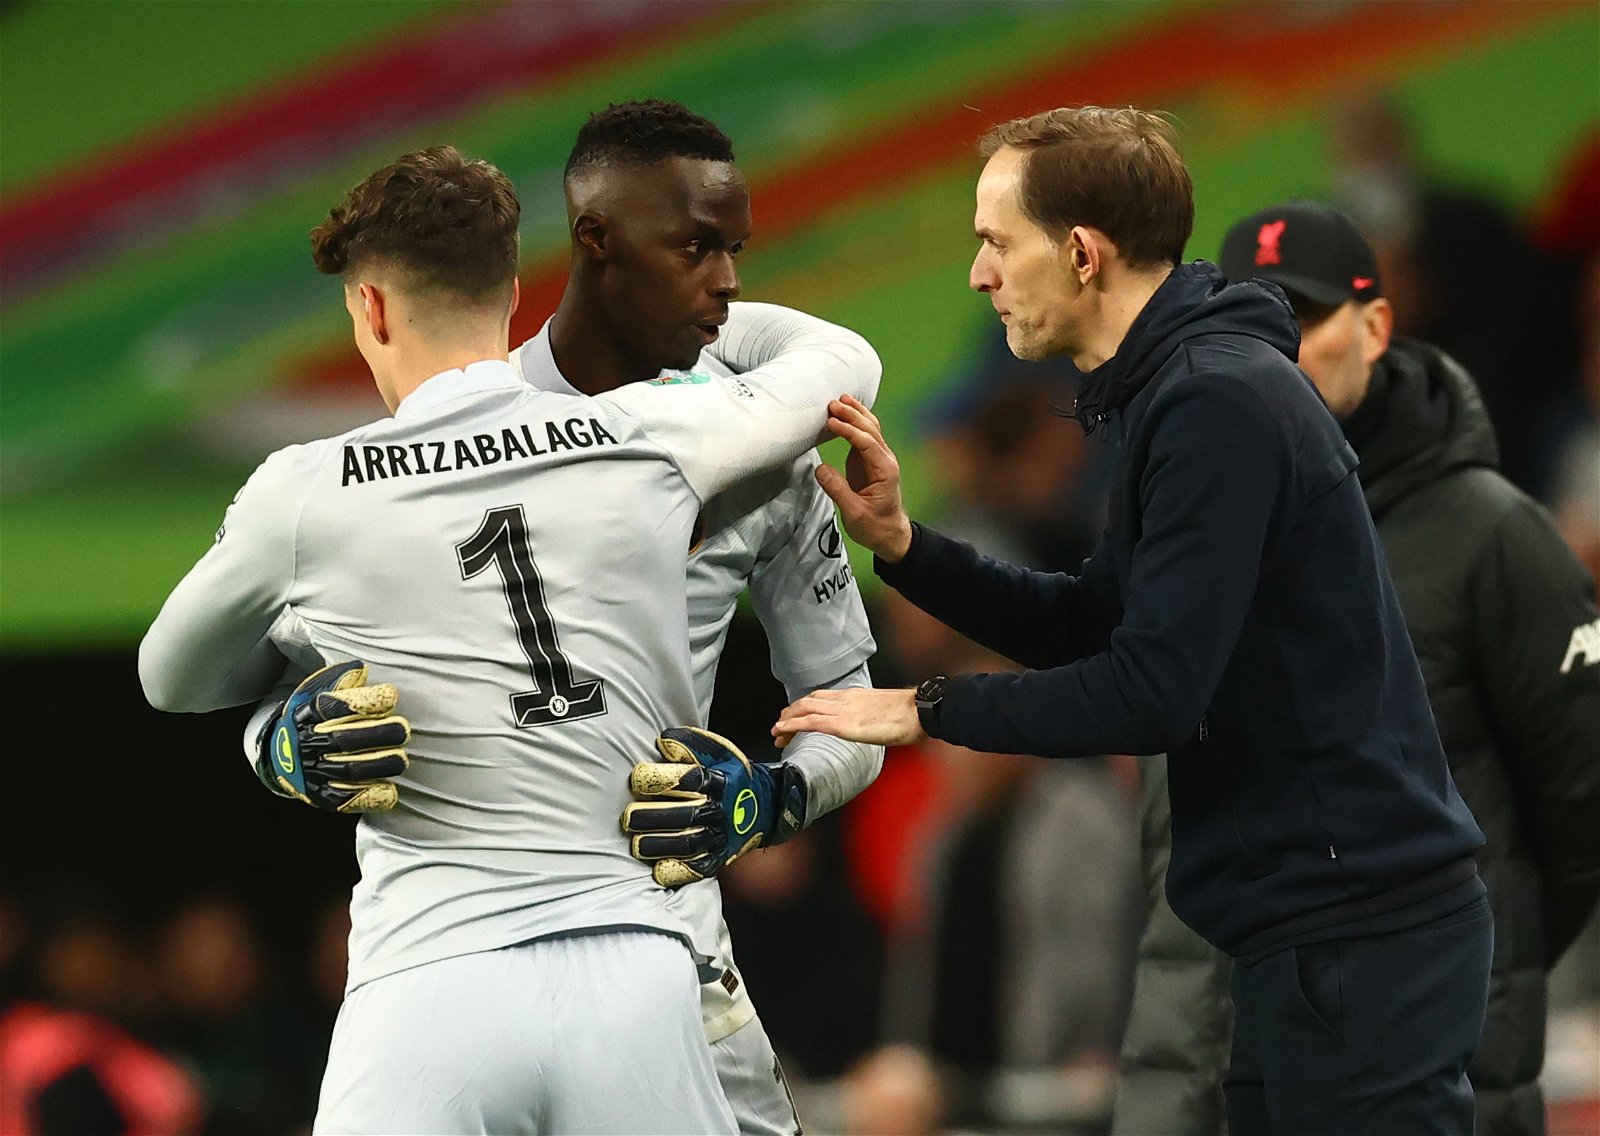 Chelsea's Kepa Arrizabalaga comes on as a substitute to replace Edouard Mendy